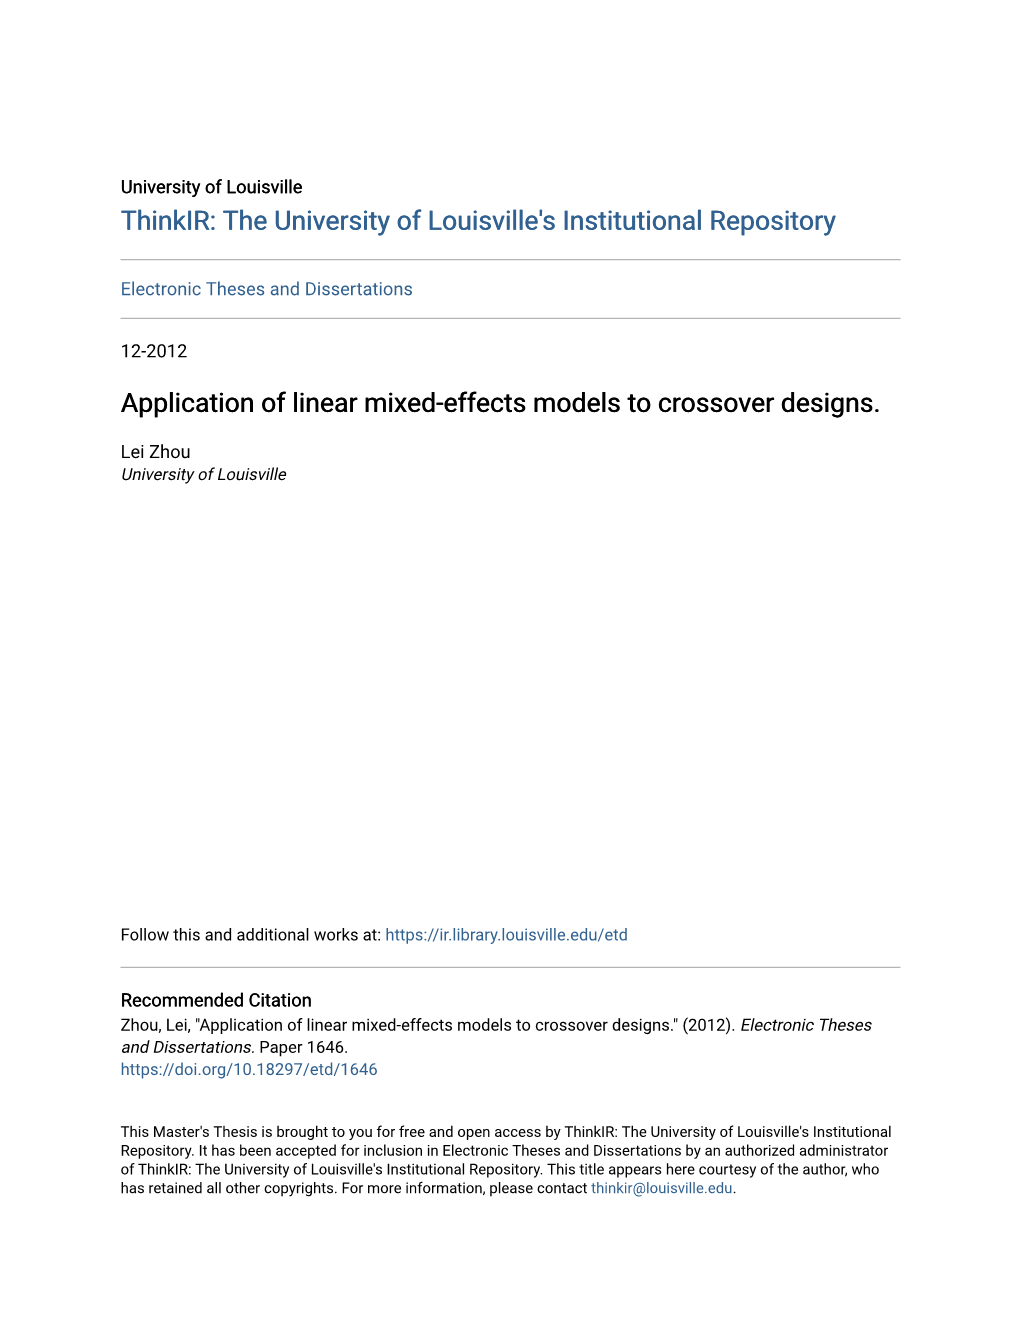 Application of Linear Mixed-Effects Models to Crossover Designs